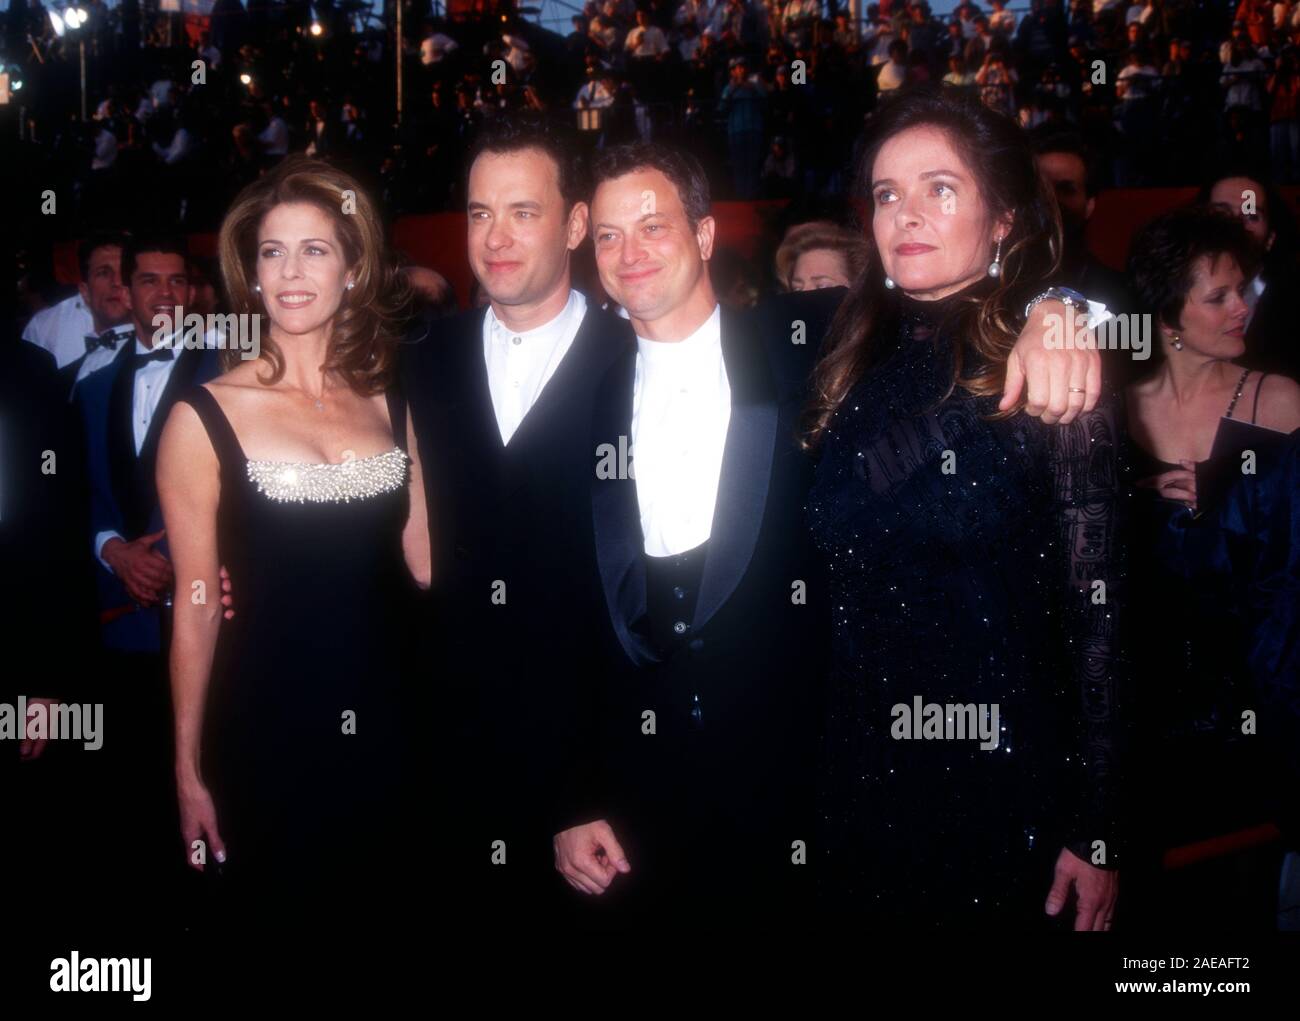 Los Angeles, California, USA 27th March 1995 Singer Rita Wilson, actor Tom Hanks, actor Gary Sinise and wife Moira Harris attend the 67th Annual Academy Awards on March 27, 1995 at the Shrine Auditorium in Los Angeles, California, USA. Photo by Barry King/Alamy Stock Photo Stock Photo